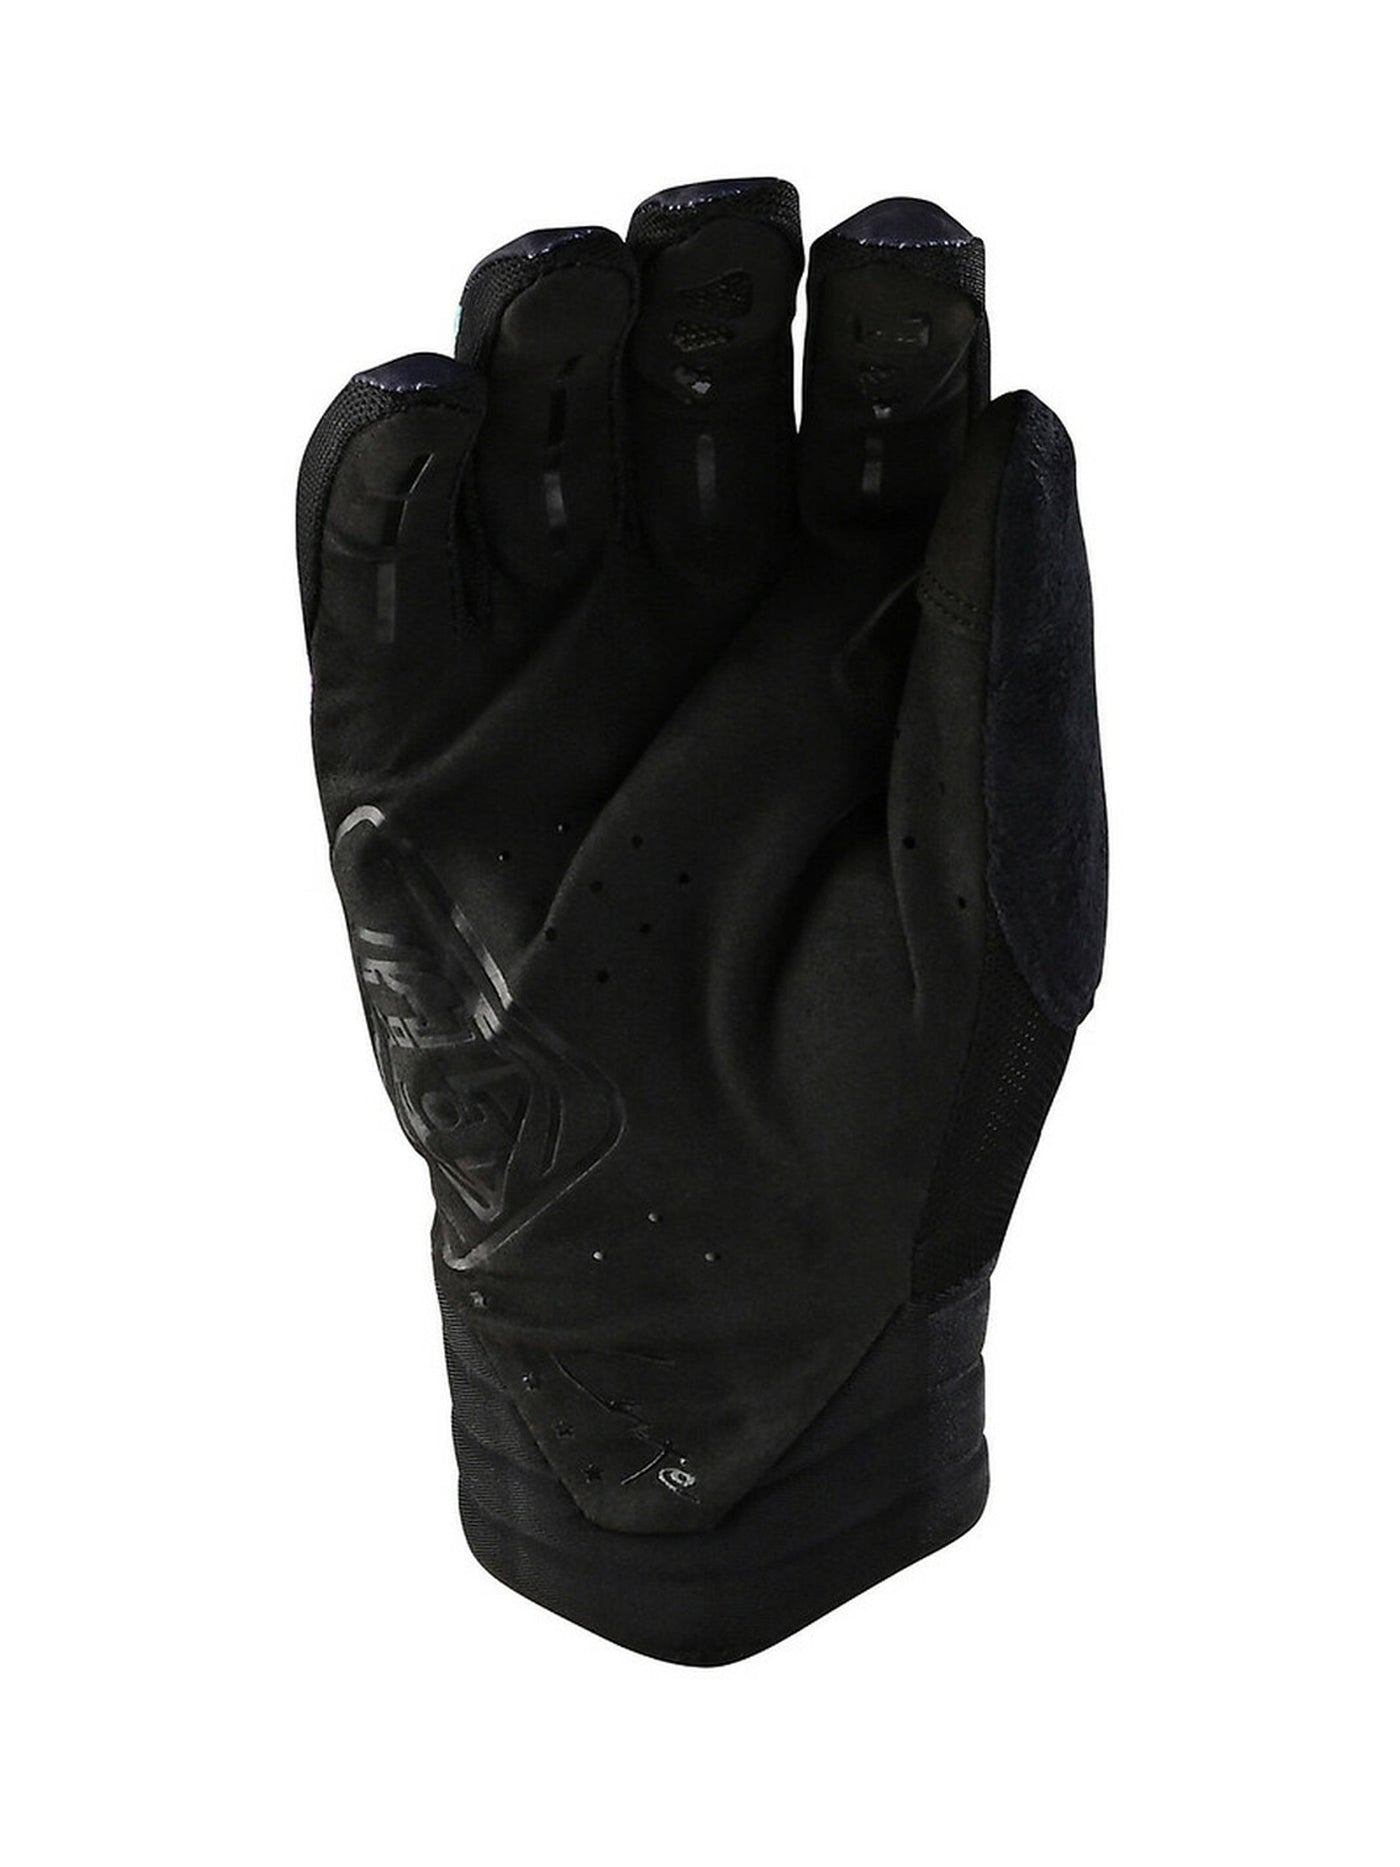 Troy Lee Designs guantes LUXE de mujer negro